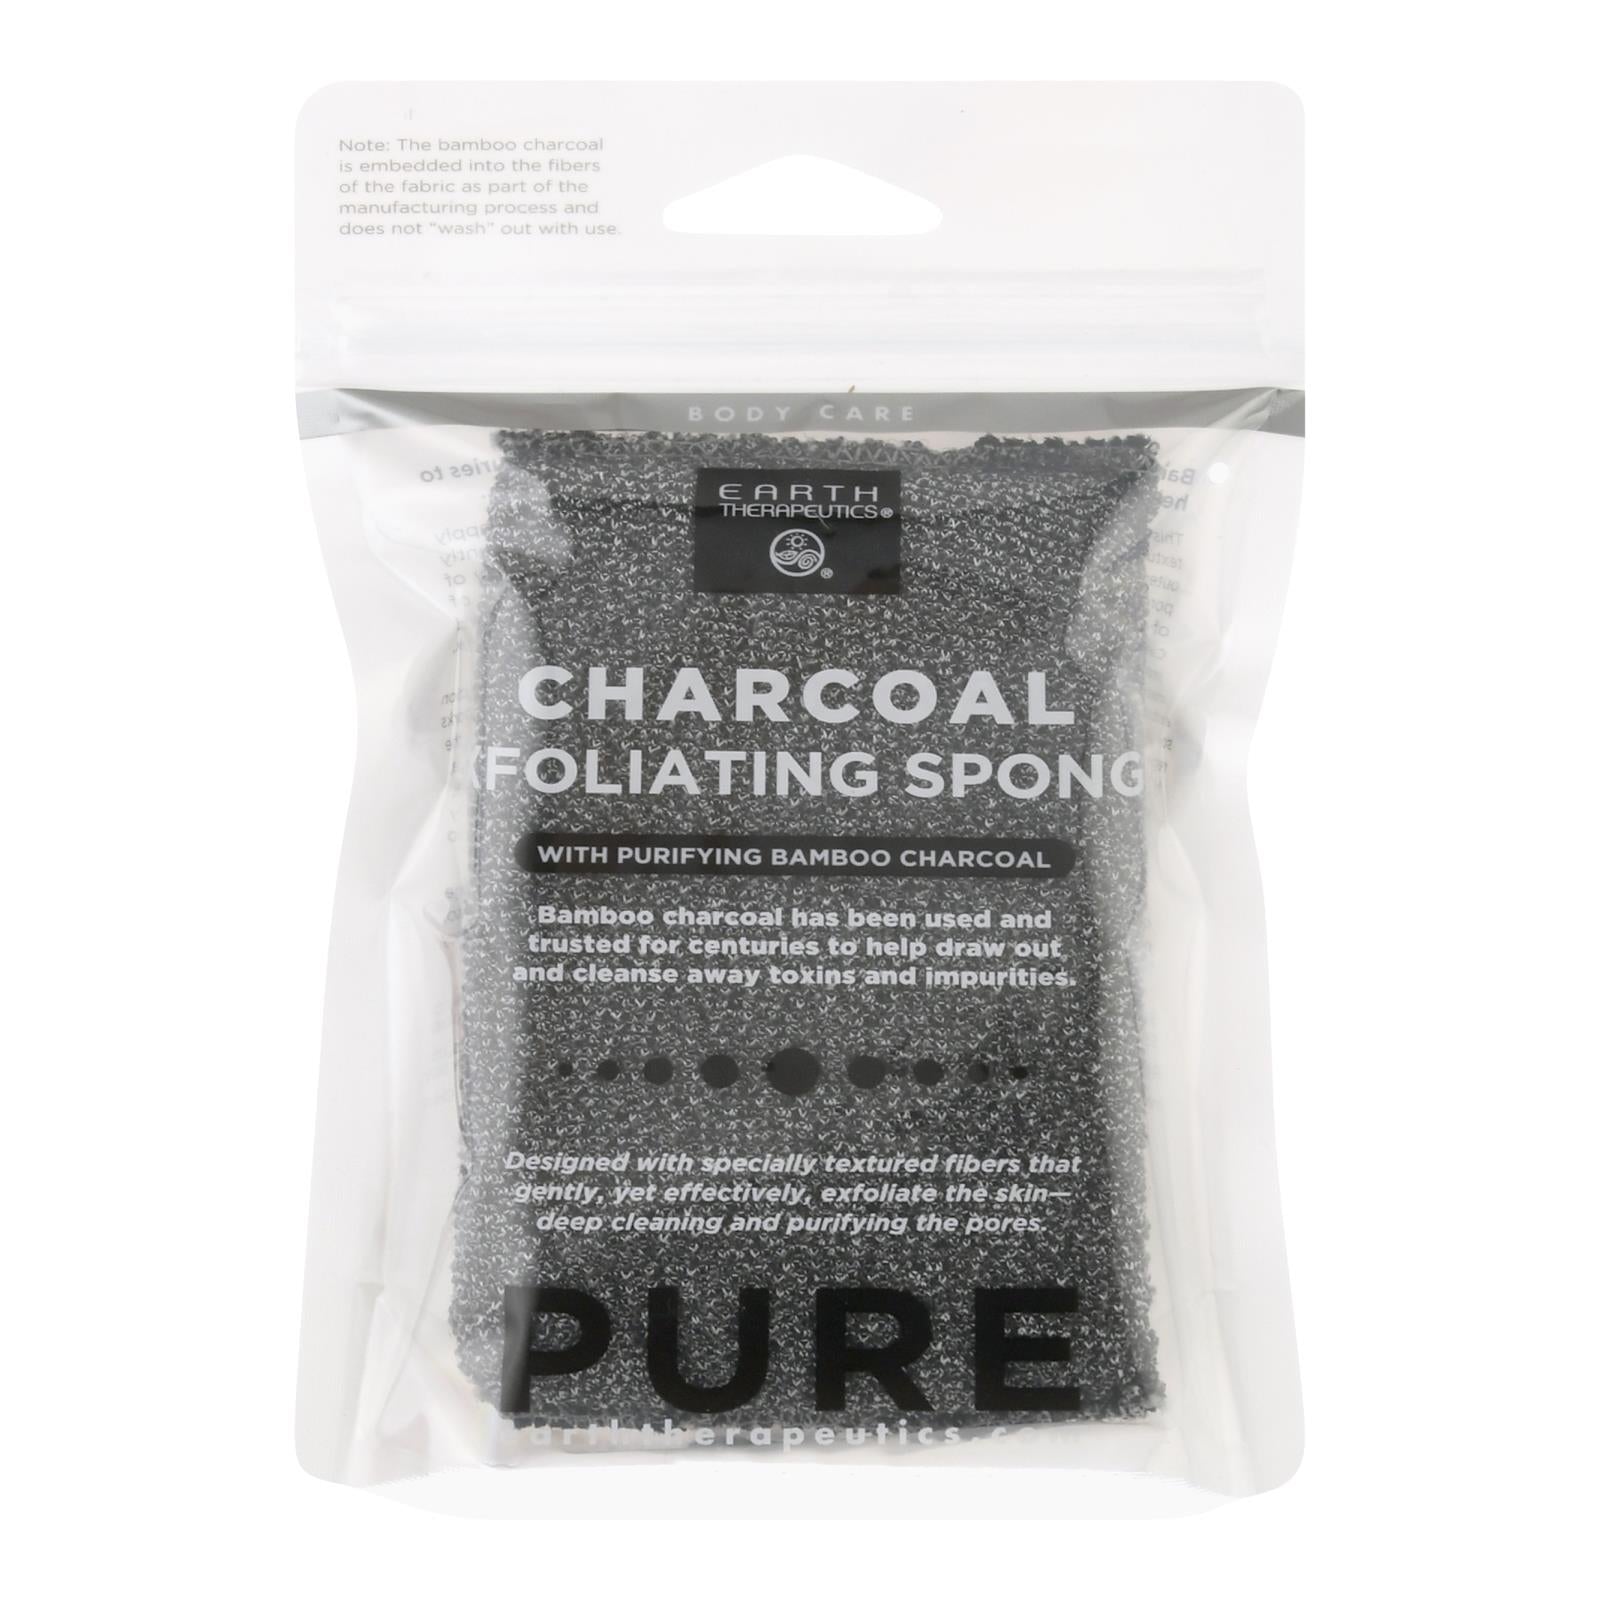 Earth Therapeutics Body Sponge - Purifying Vegetable - Medicinal Charcoal - 1 Count